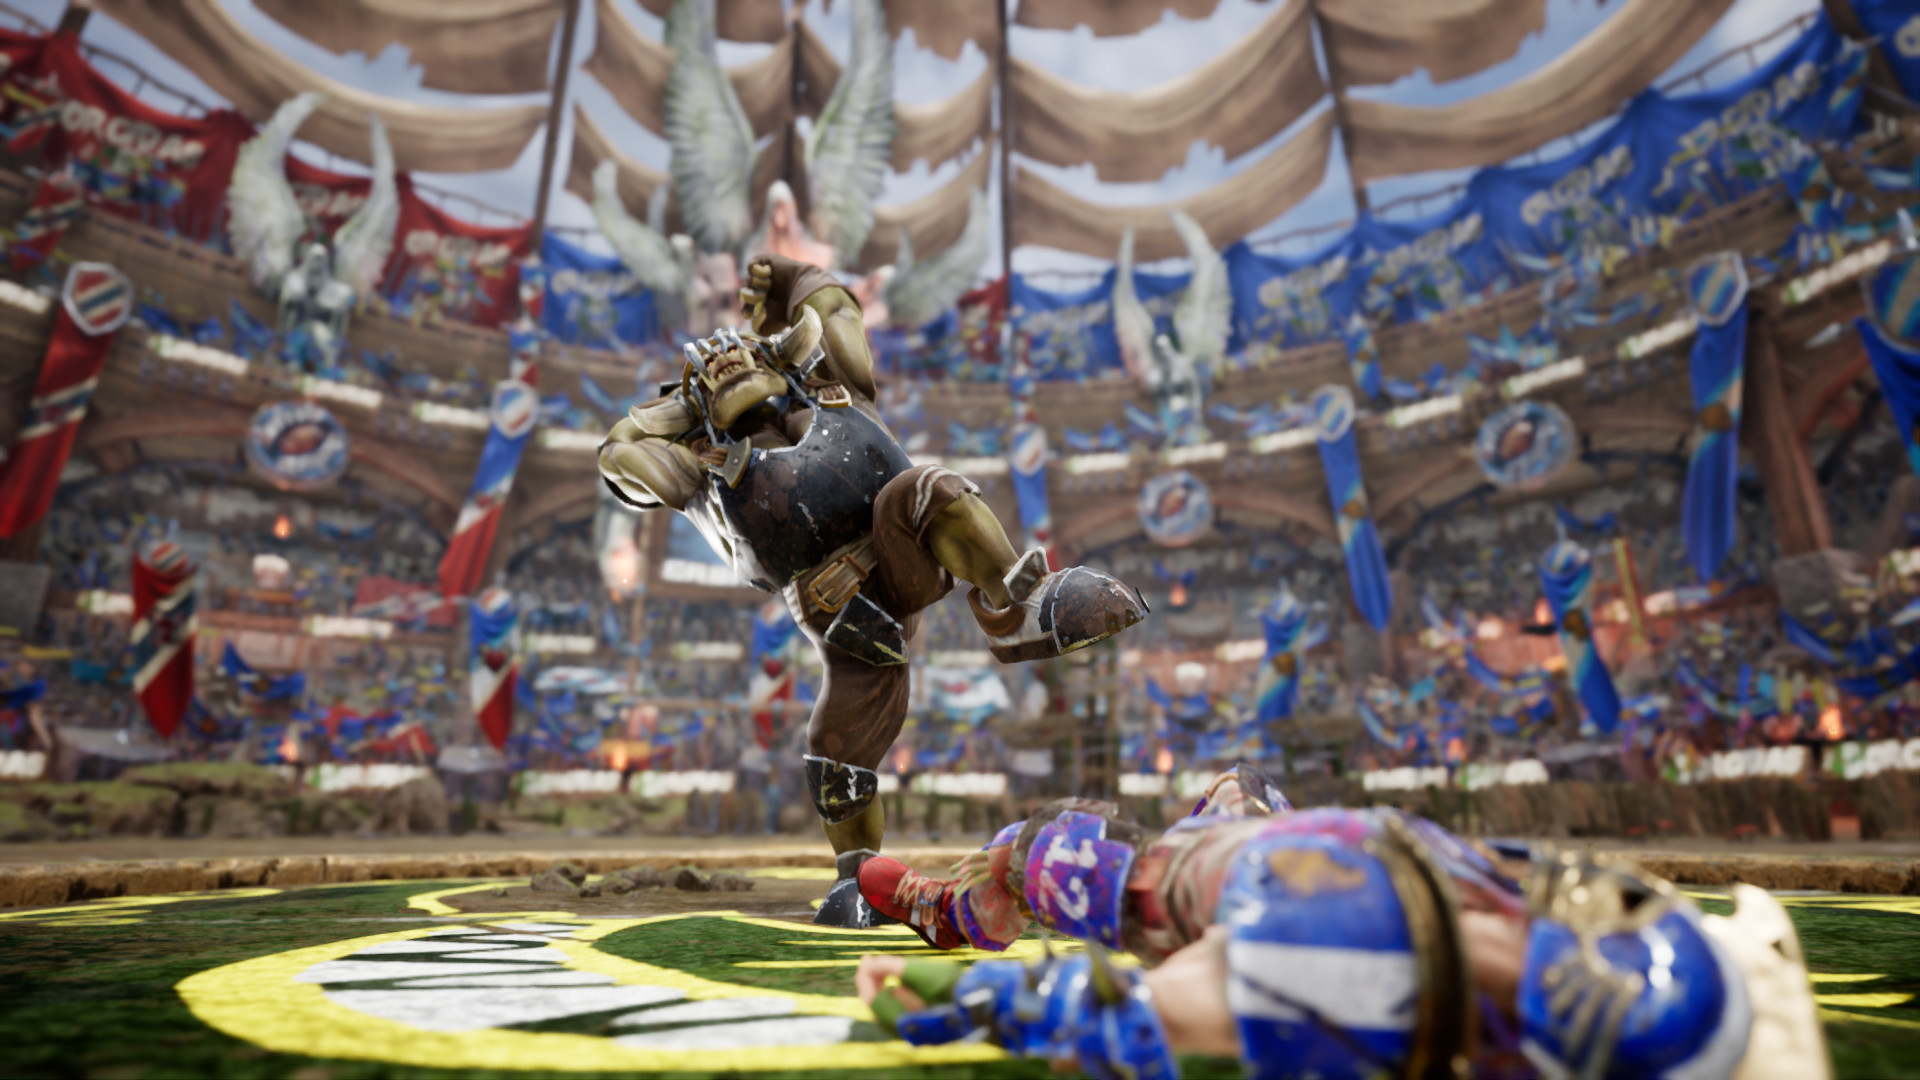 blood bowl 3 switch release date